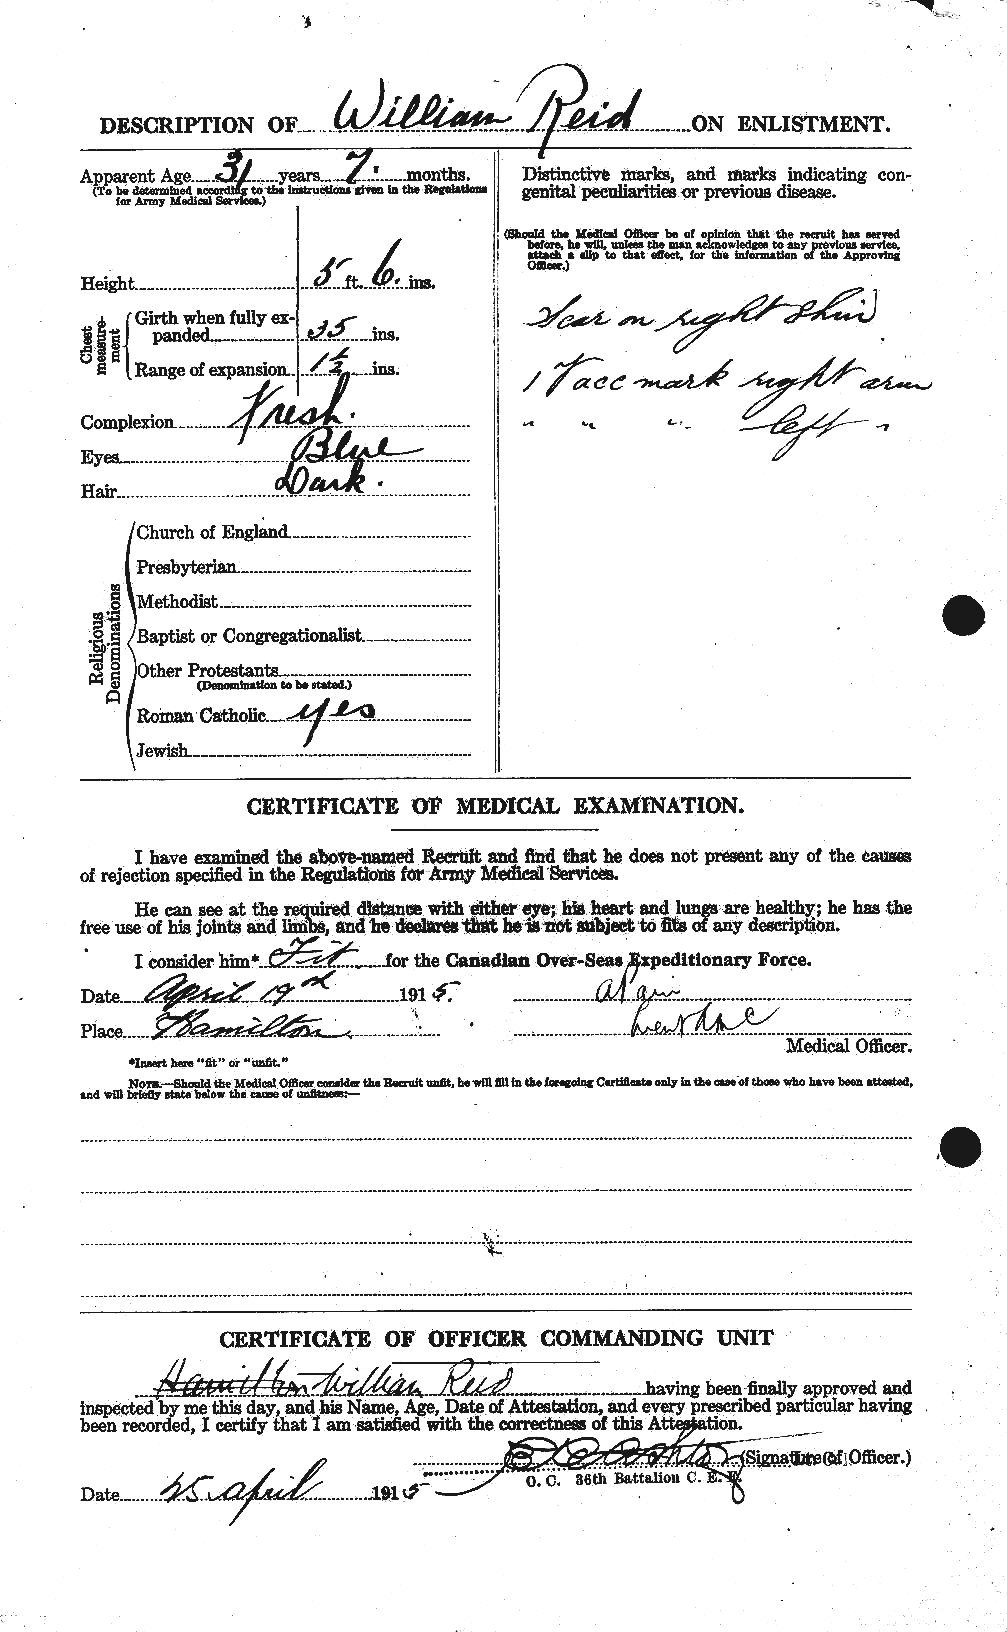 Personnel Records of the First World War - CEF 596951b